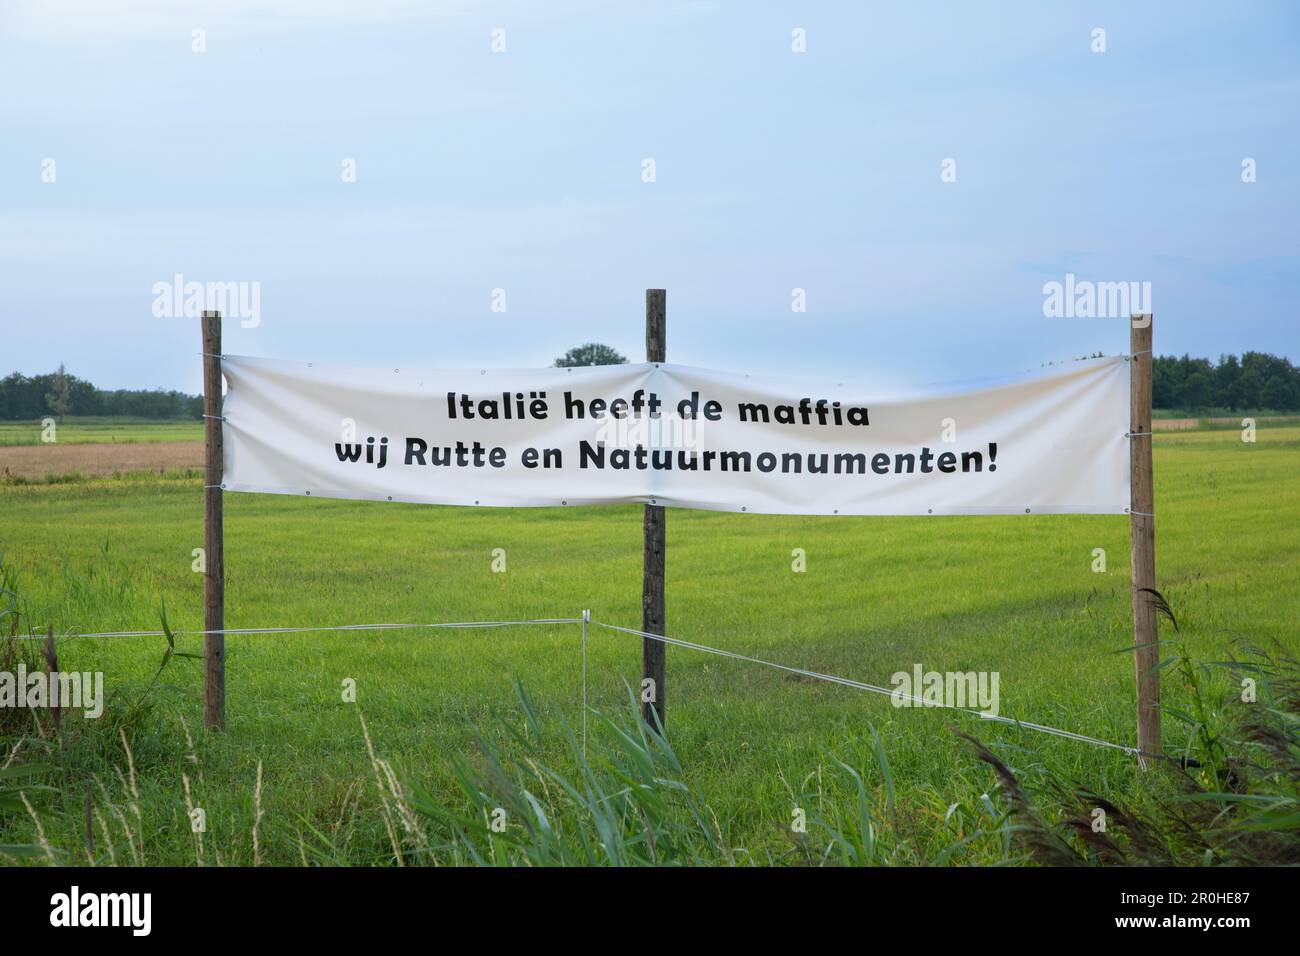 farmers' protest against EU agrarian policy, banner with criticism at Rutte, Netherlands, Overijssel, Steenwijk Stock Photo